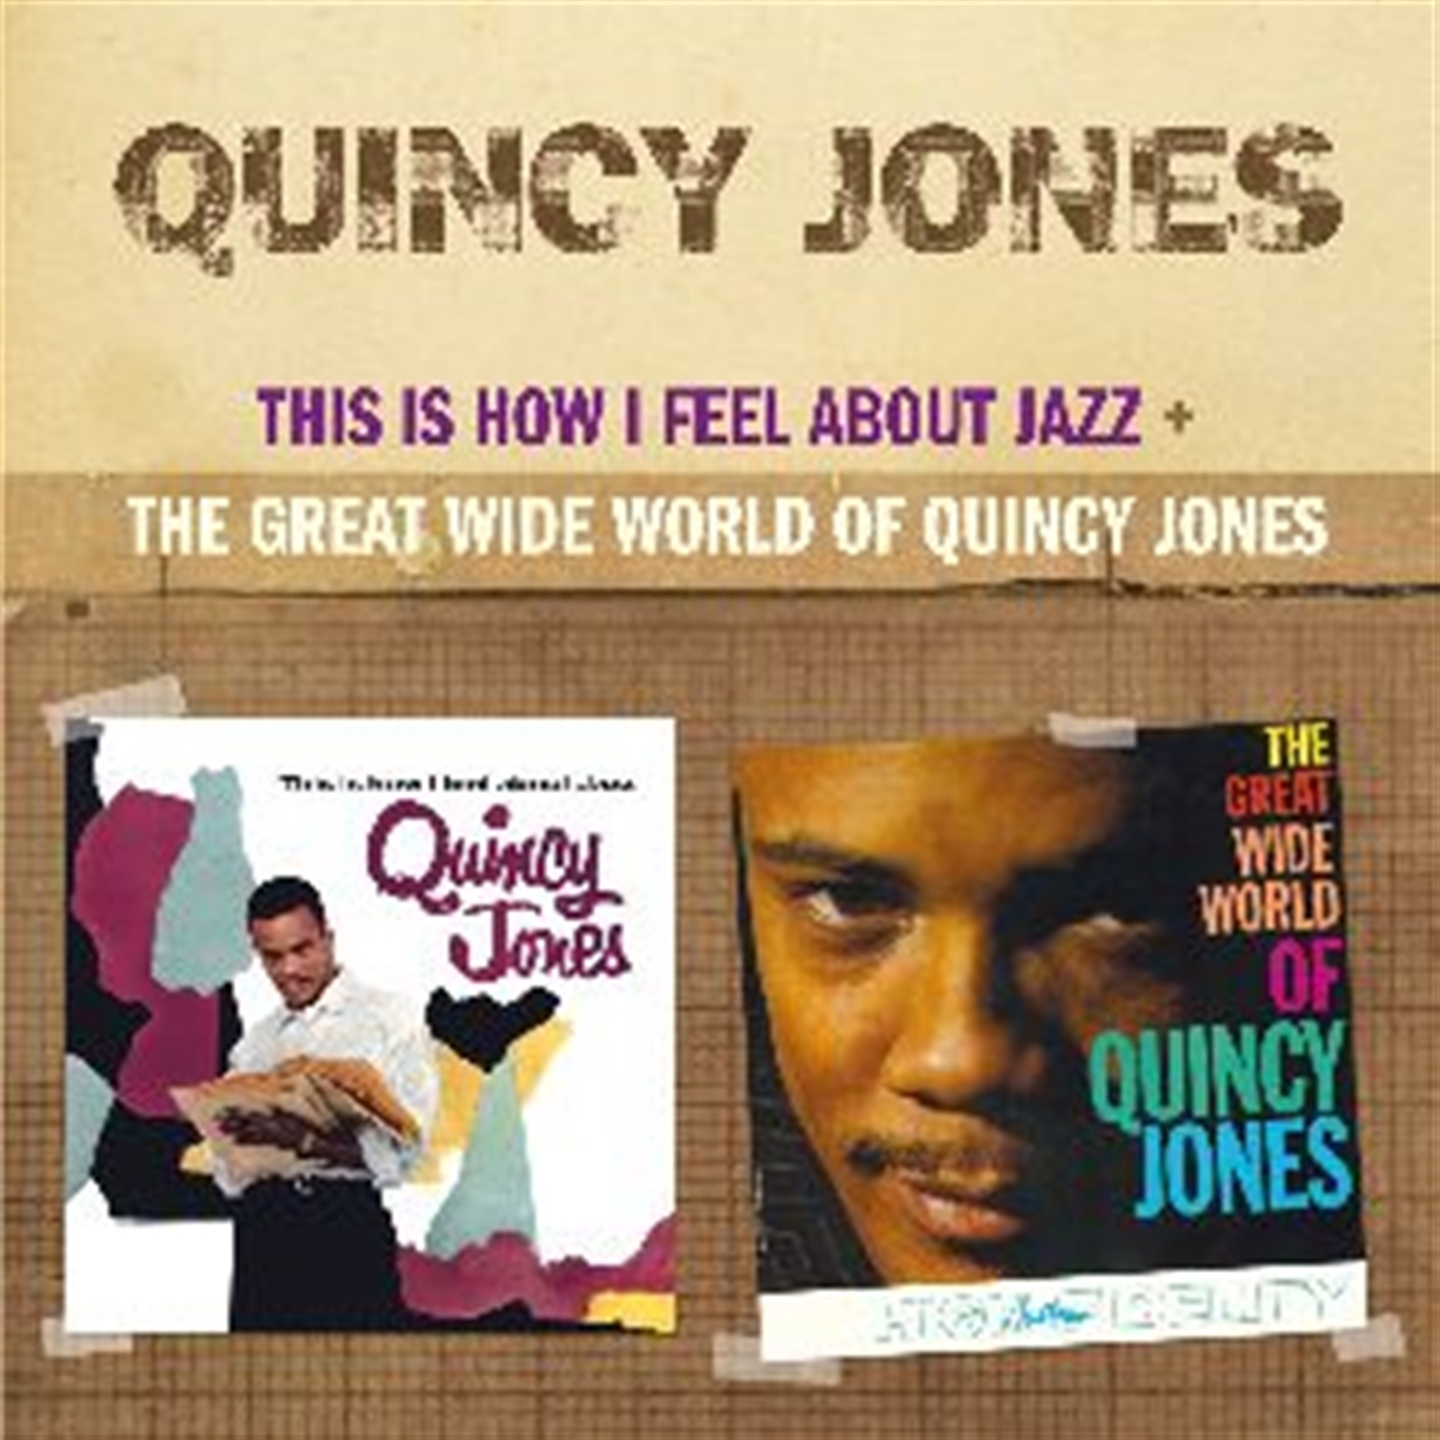 THIS IS HOW I FEEL ABOUT JAZZ (+ THE GREAT WIDE WORLD OF QUINCY JONES)